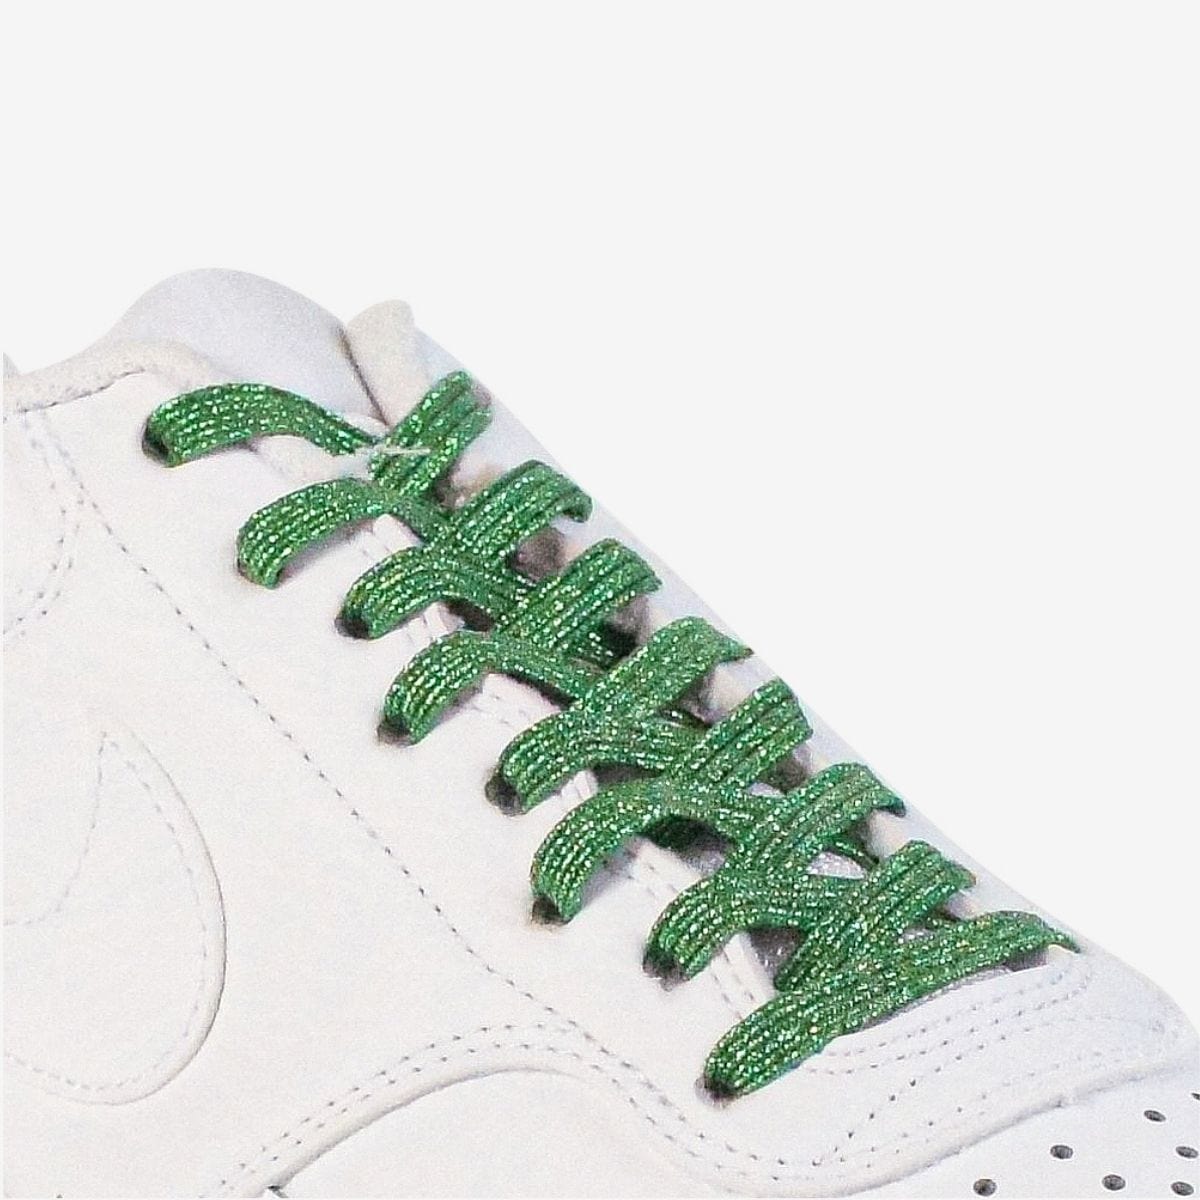 different-ways-to-lace-shoes-with-green-elastic-shoelaces-on-white-kicks